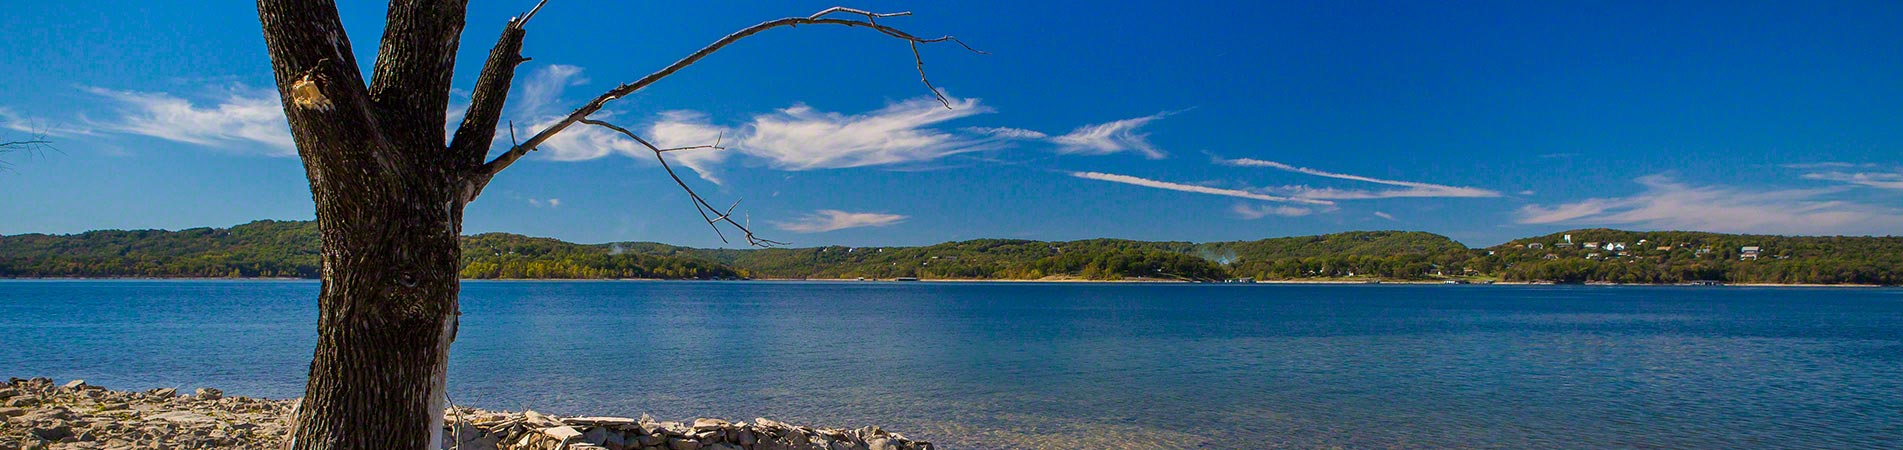 The excellent view you'll find right by the Emerald Pointe Near Branson, MO.